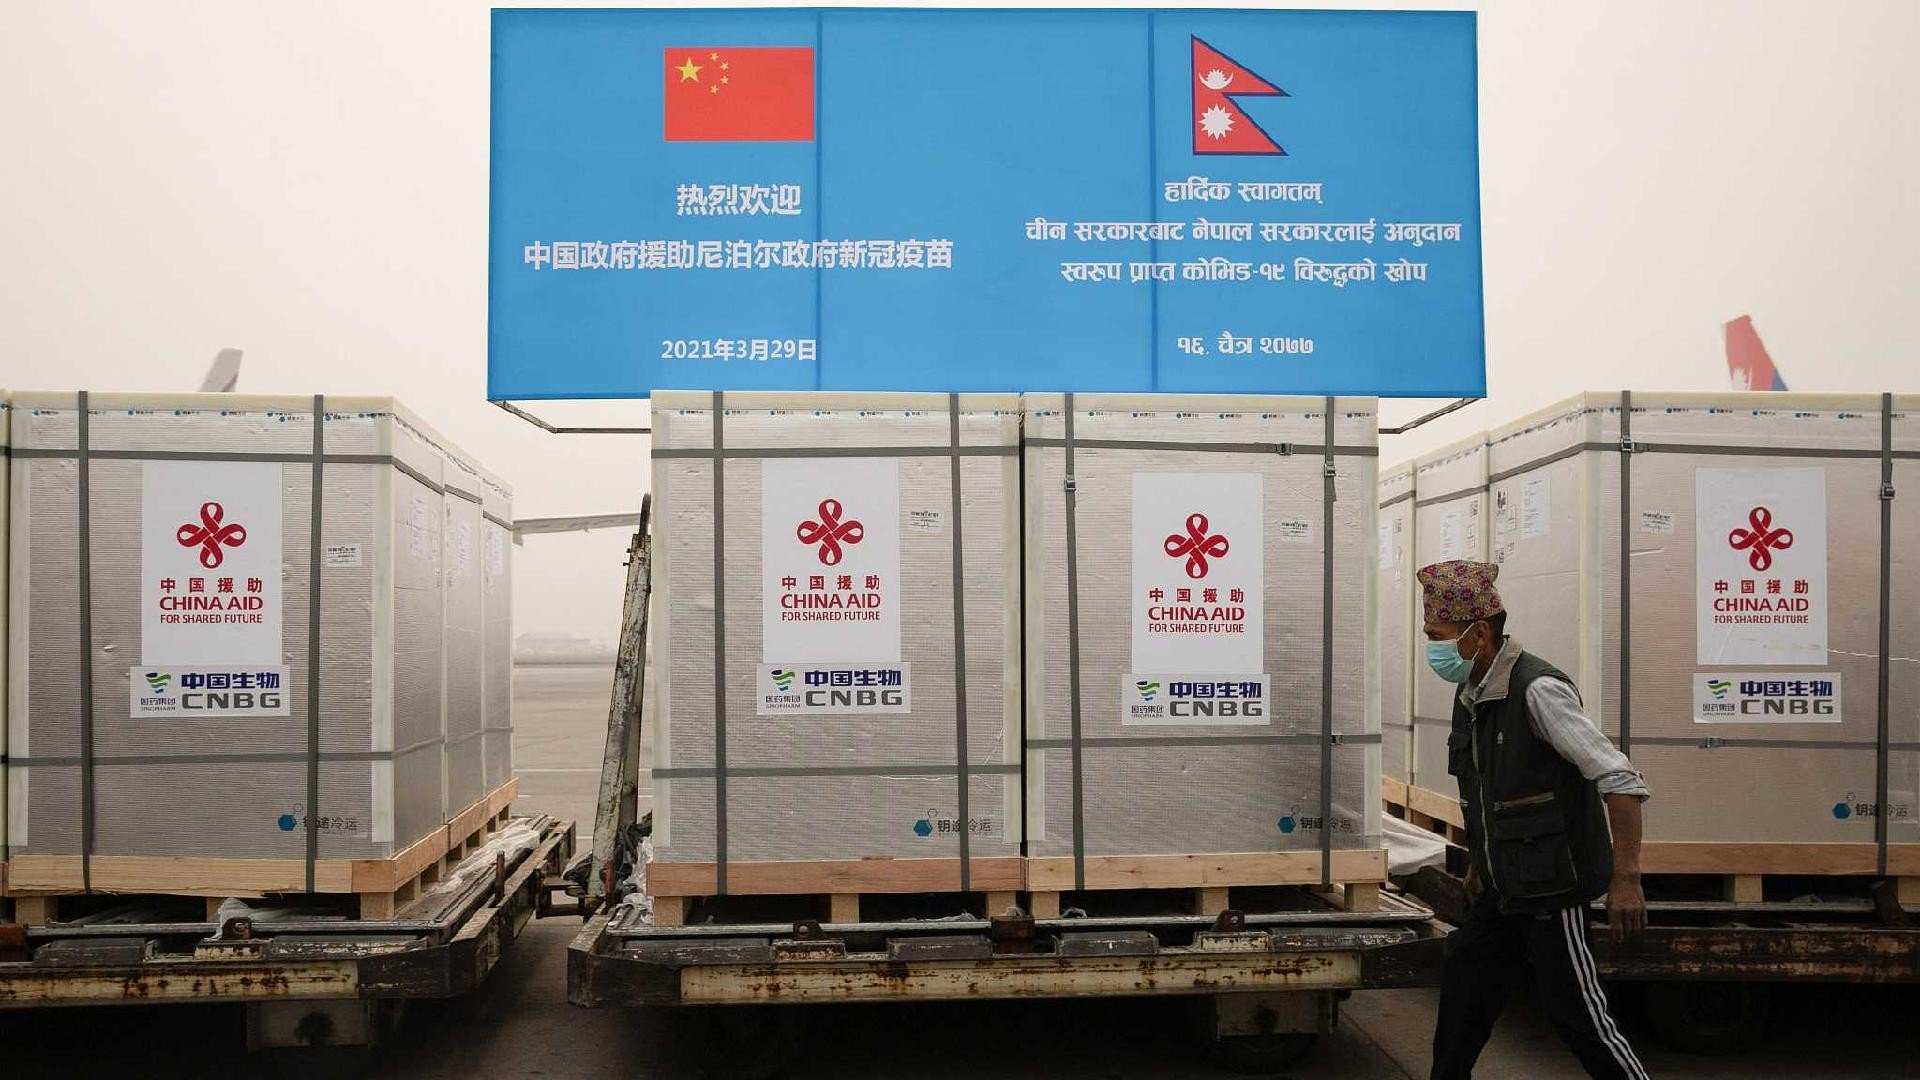 all-4-million-doses-of-vero-cell-brought-in-from-beijing